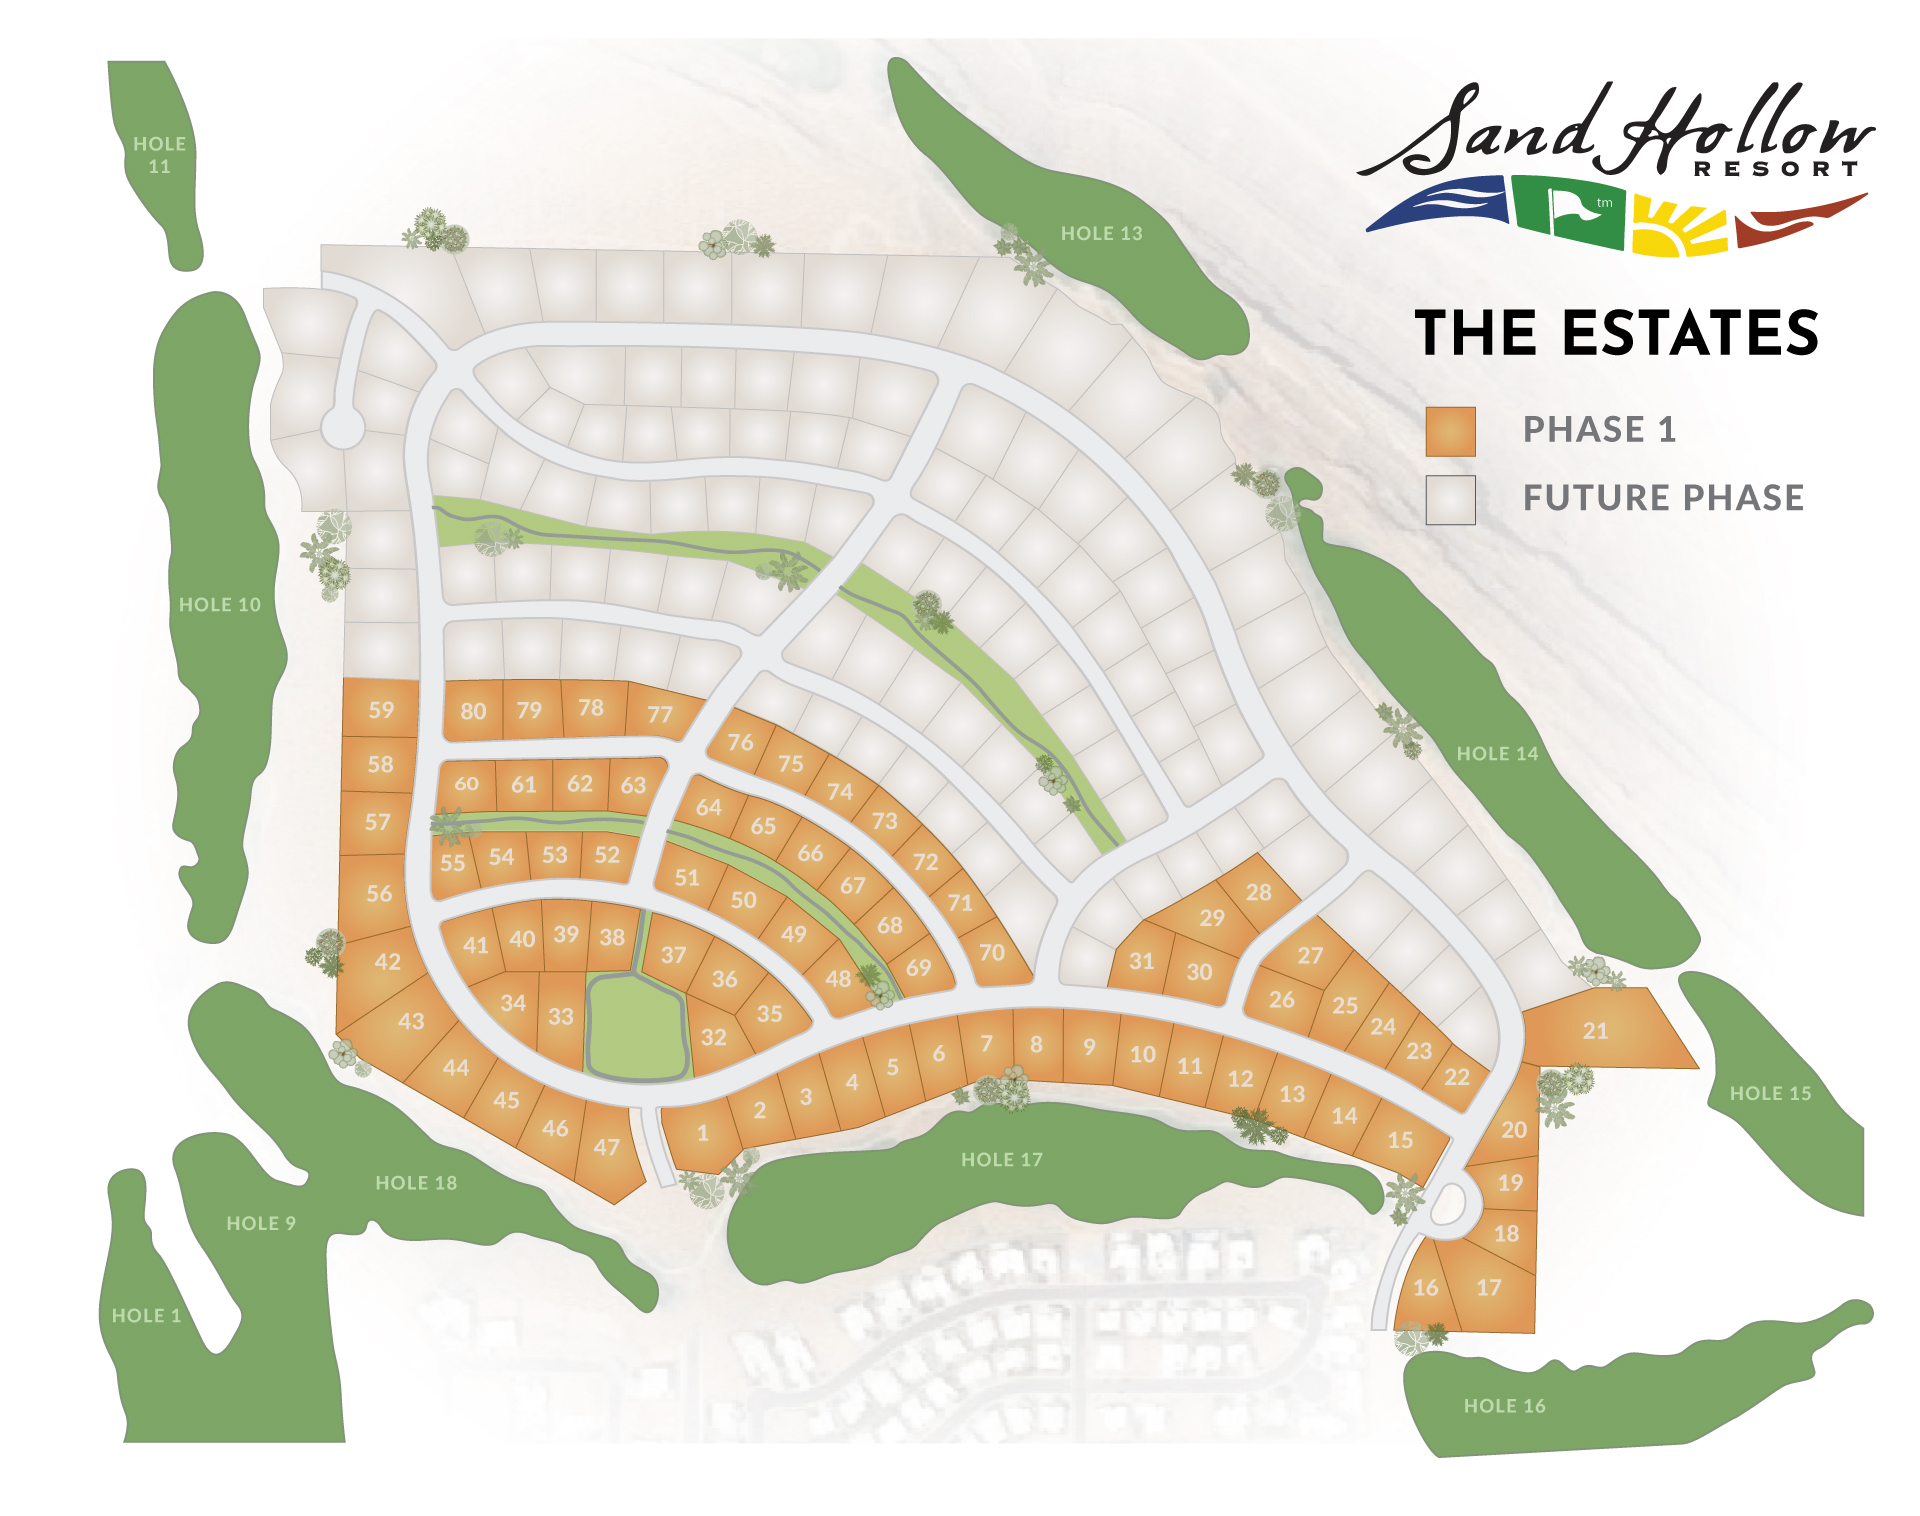 The Estates at Sand Hollow